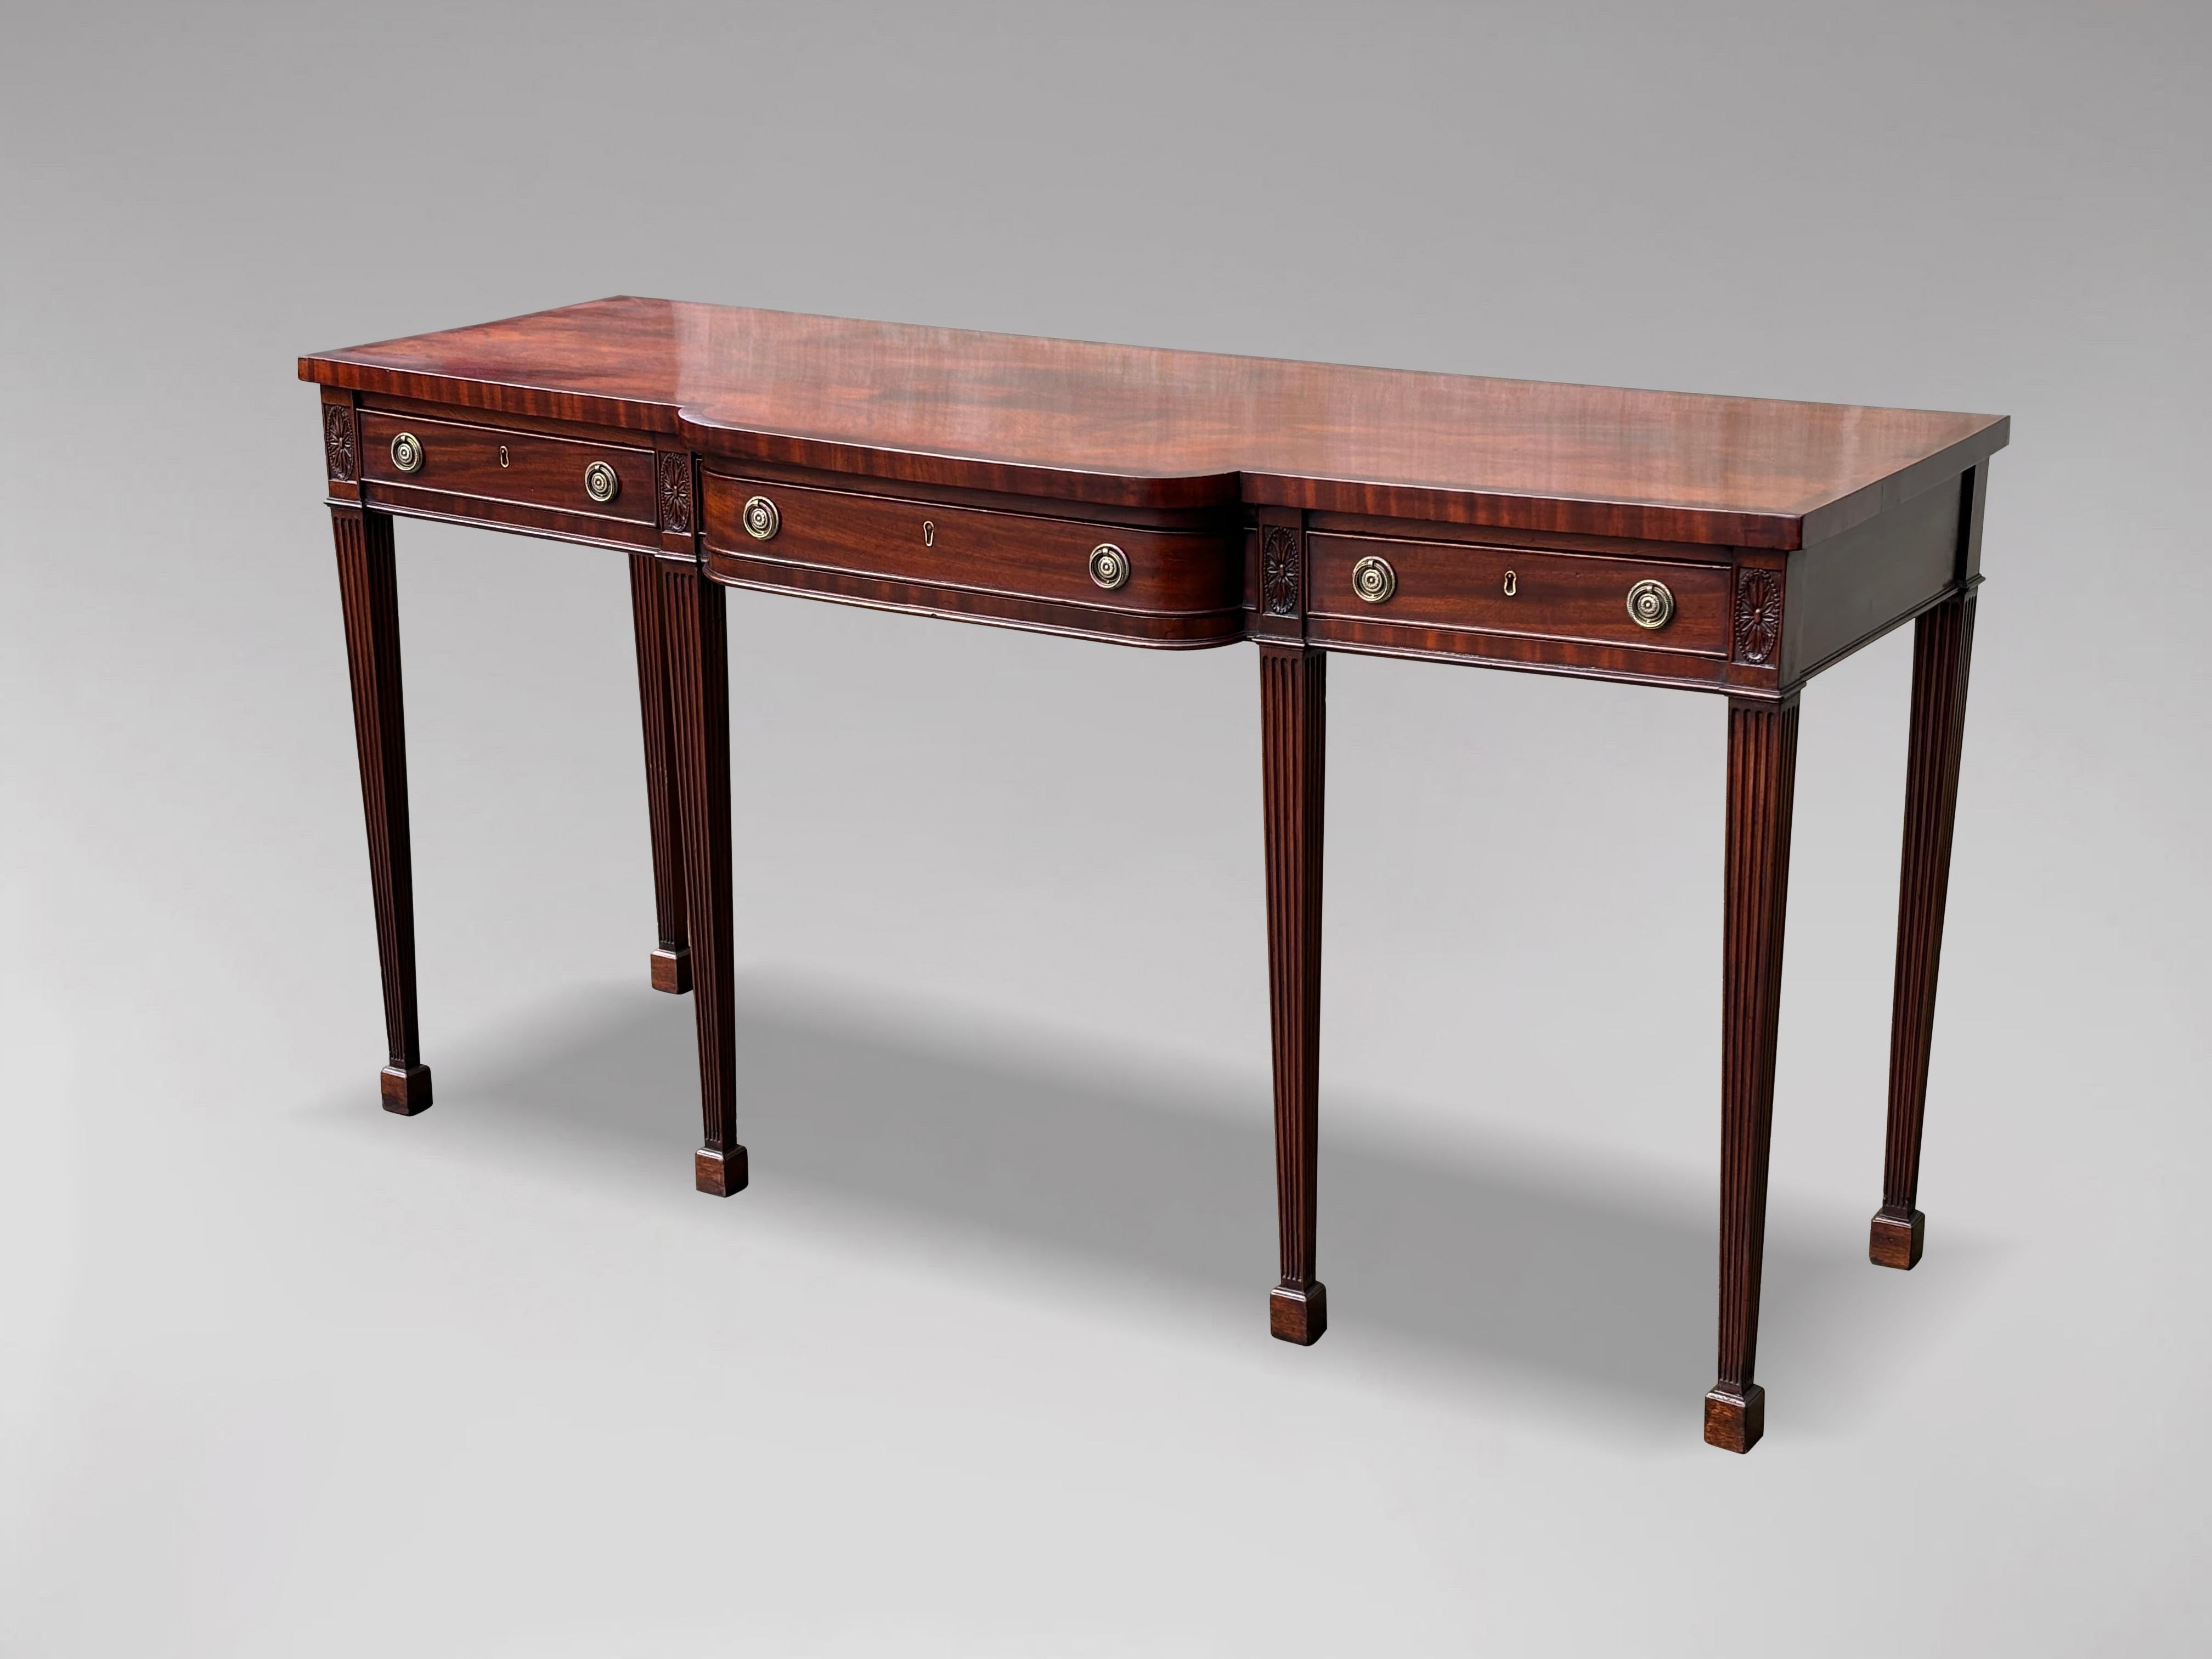 A wonderful early 19th century, George III period mahogany rectangular breakfront serving table or sideboard. The crossbanded top is made from a single section of figured mahogany which runs the whole length, above one long centre drawer flanked by